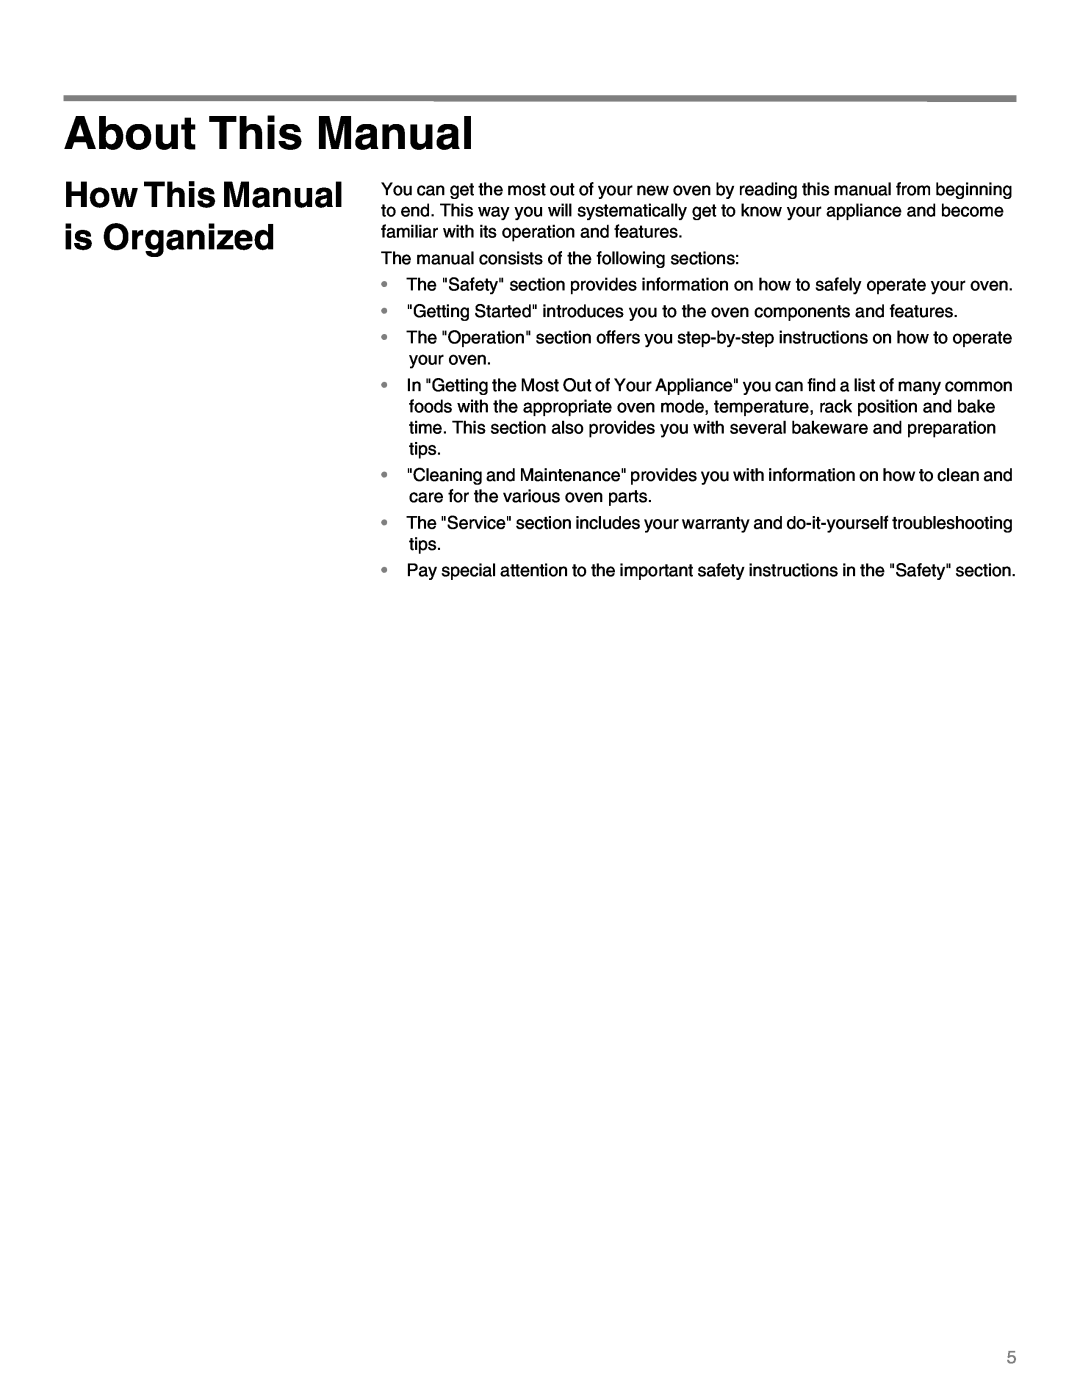 Thermador M301E, M271E manual About This Manual, How This Manual is Organized 